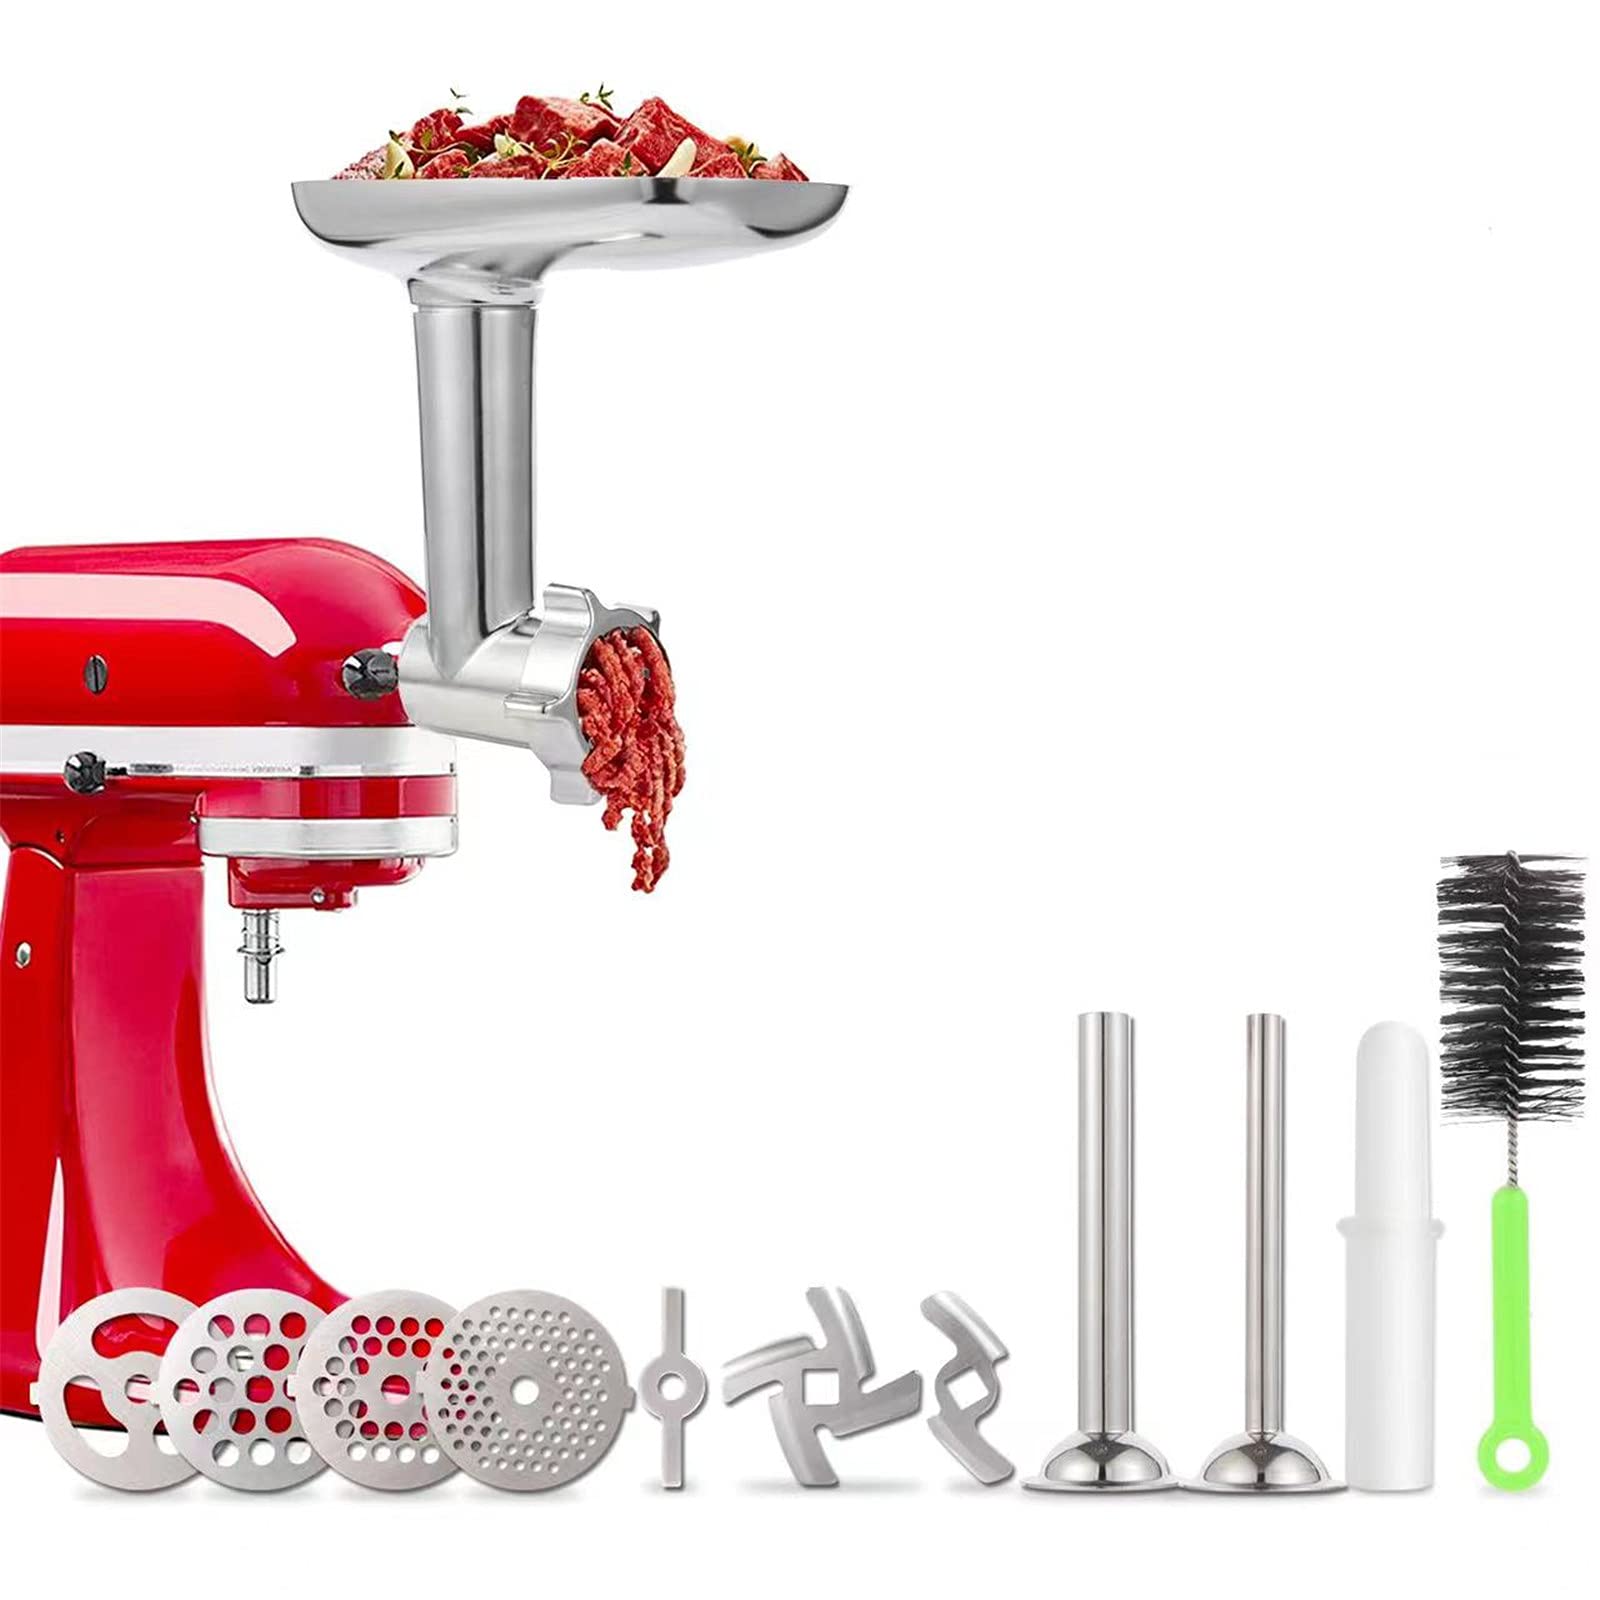 Kitchood Meat Grinder Attachment for KitchenAid Stand Mixers, Accessories Included 2 Sausage Stuffer Tubes, Durable Metal Food Grinder At